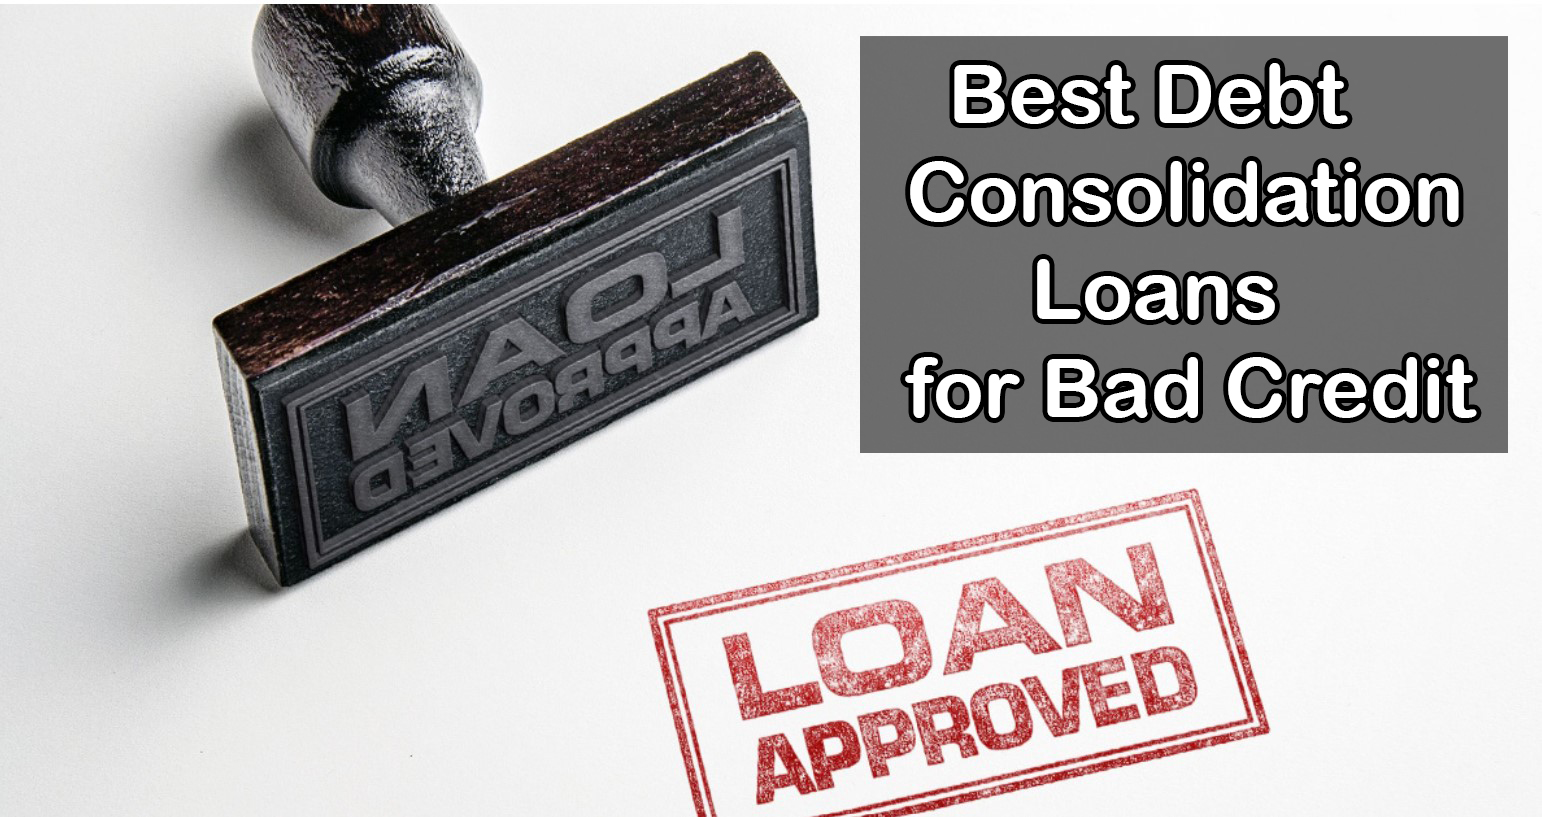 Best Debt Consolidation Loans for Bad Credit